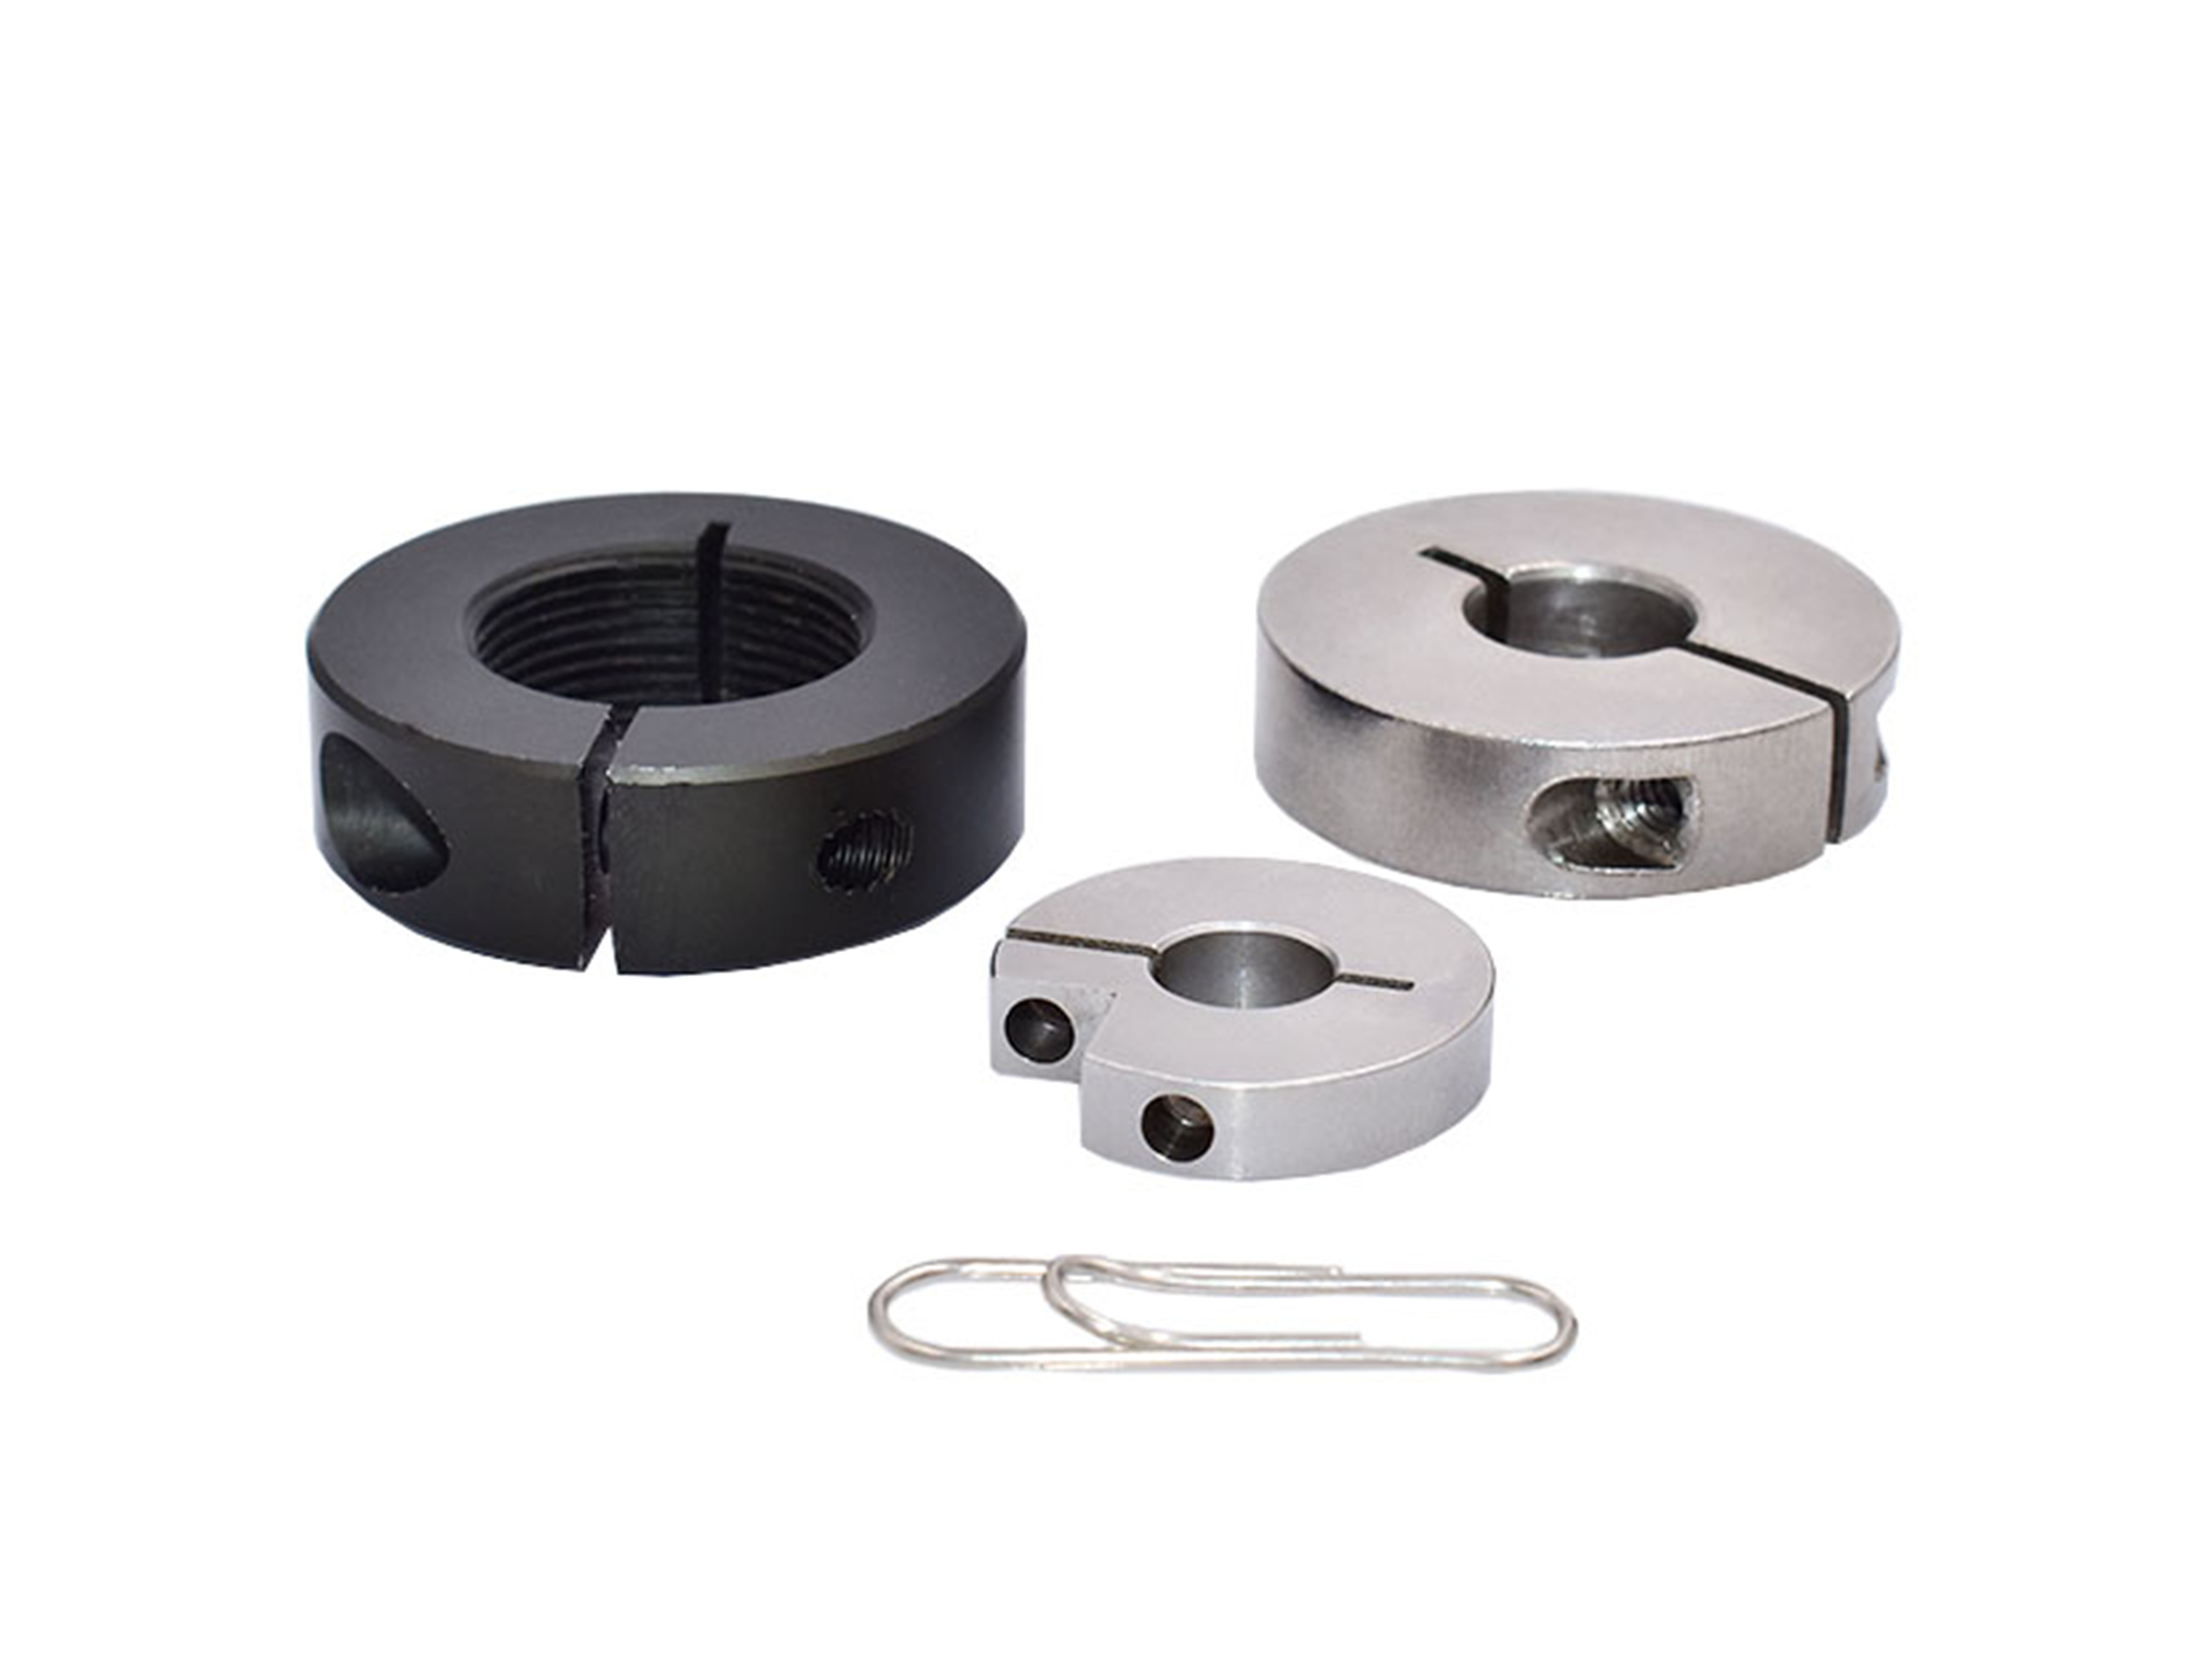 What are the advantages of CNC processing Round Collar Clamps?